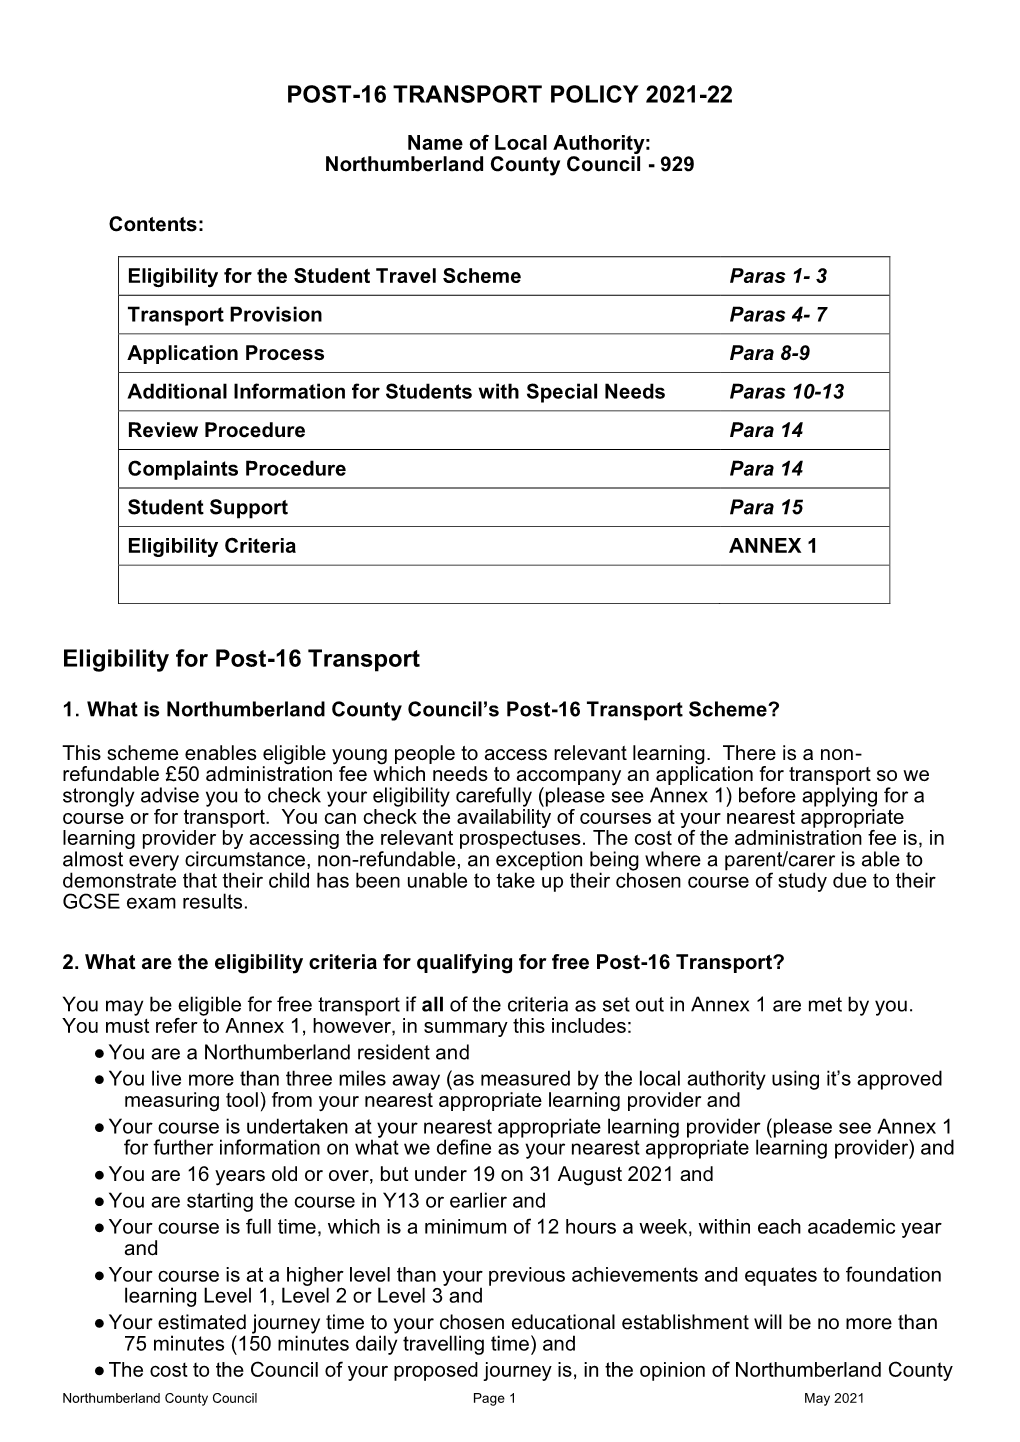 Post-16 Transport Policy 2021-22